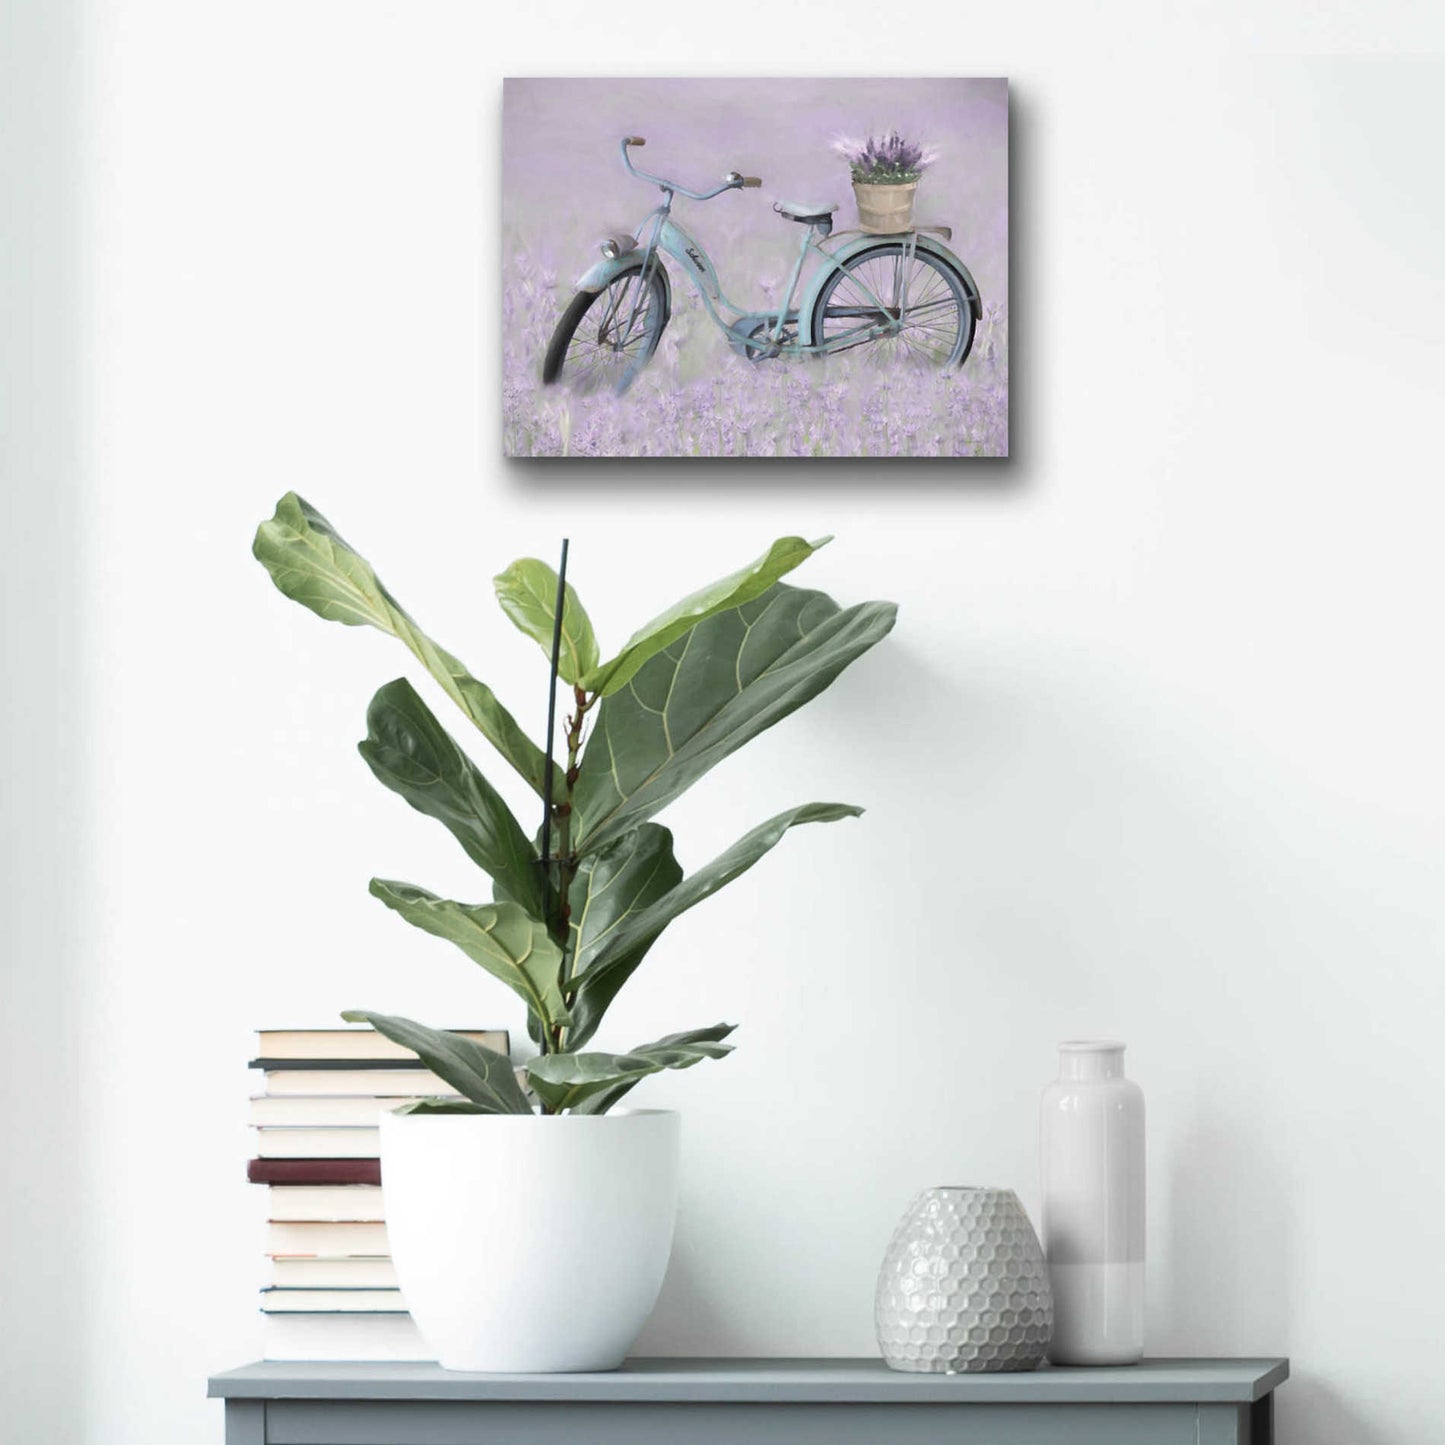 Epic Art 'Bicycle in Lavender' by Lori Deiter Acrylic Glass Wall Art,16x12